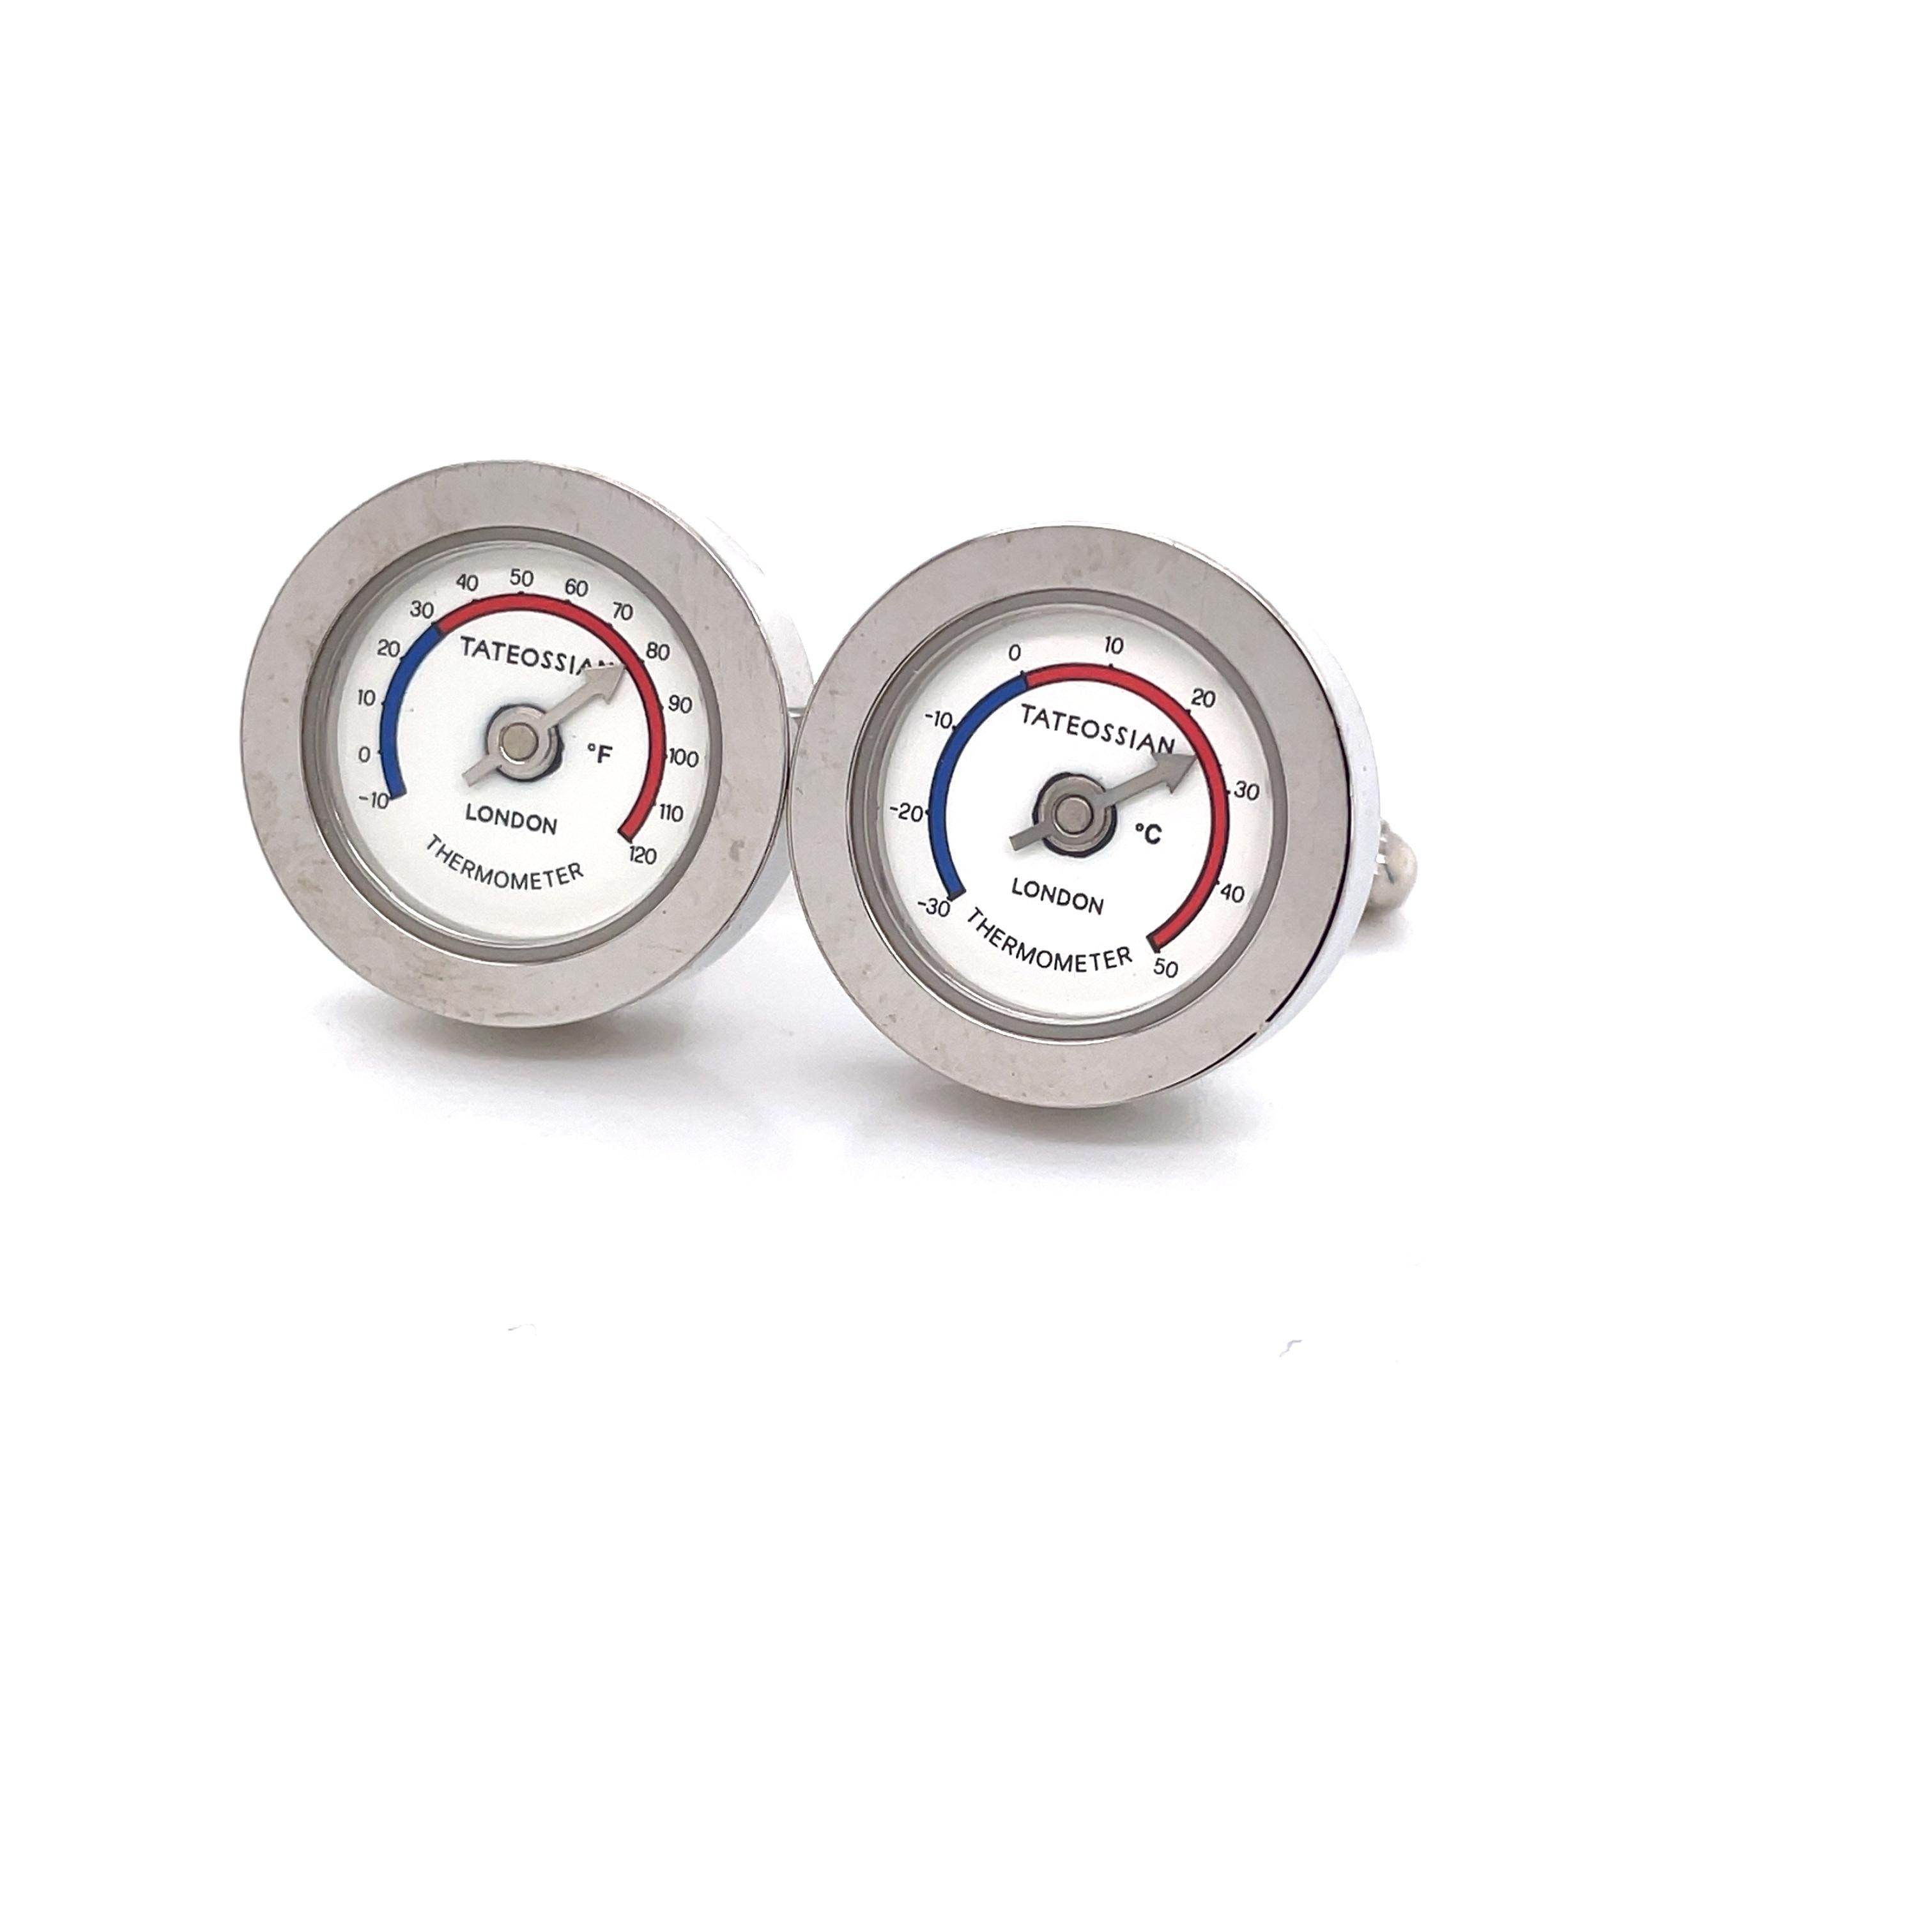 A stylish and fun wardrobe detail.  Enjoy this novelty pair of Tateossian London Thermometer Cuff Links. Round, measuring 20mm with a Celsius scale gauge and toggle backs.
Gift boxed.  